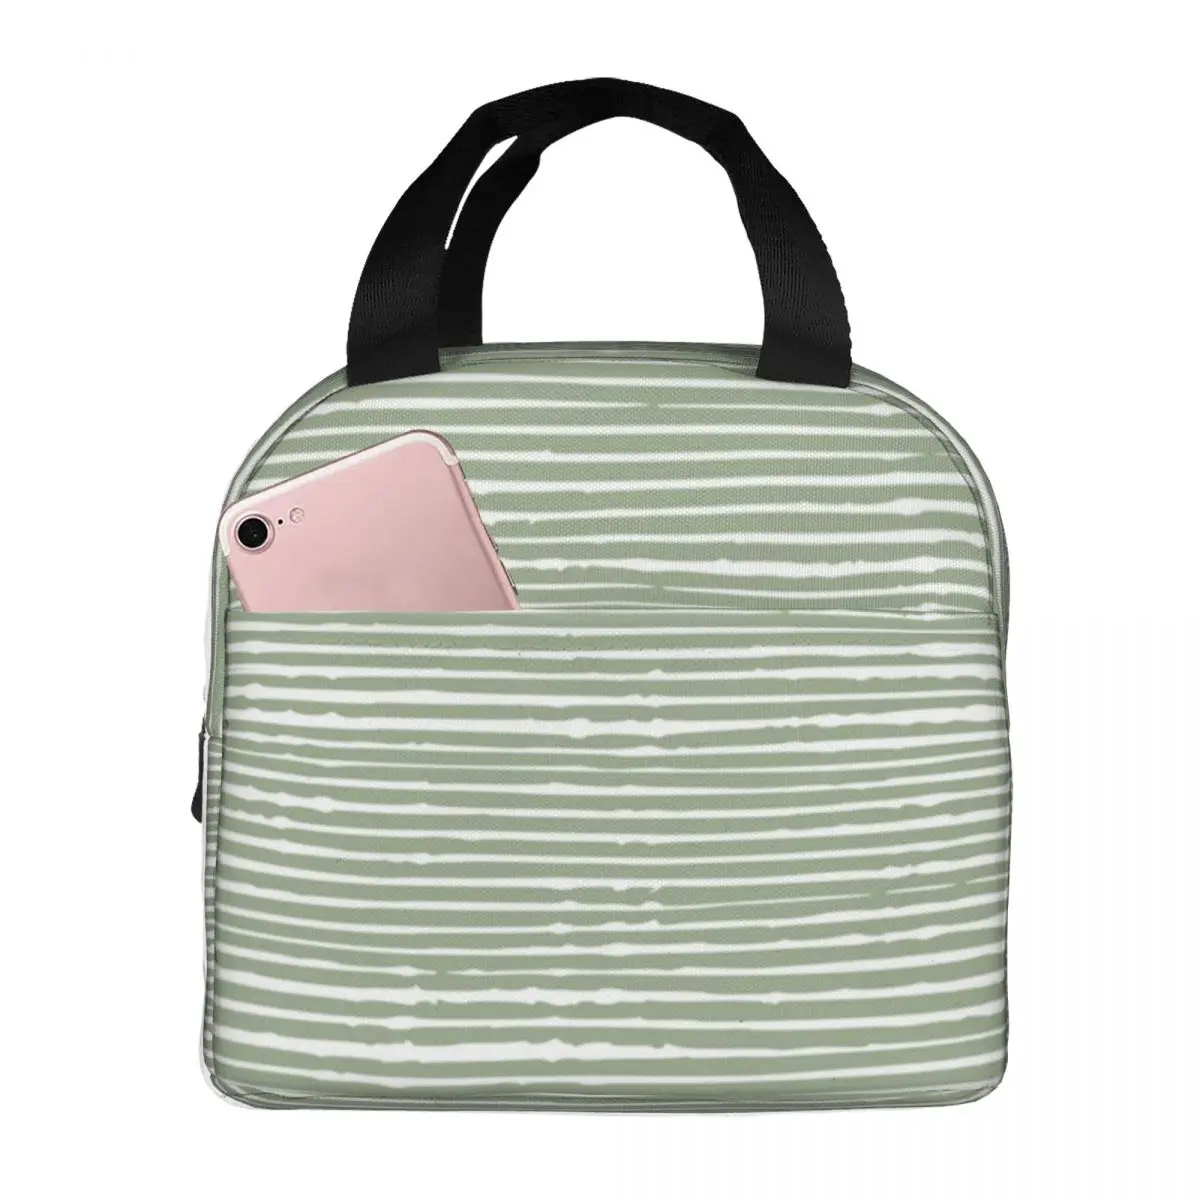 

Nature's Abstract Stripes Sage Green White Lunch Bag Waterproof Insulated Cooler Thermal Food Picnic Lunch Box for Women Girl